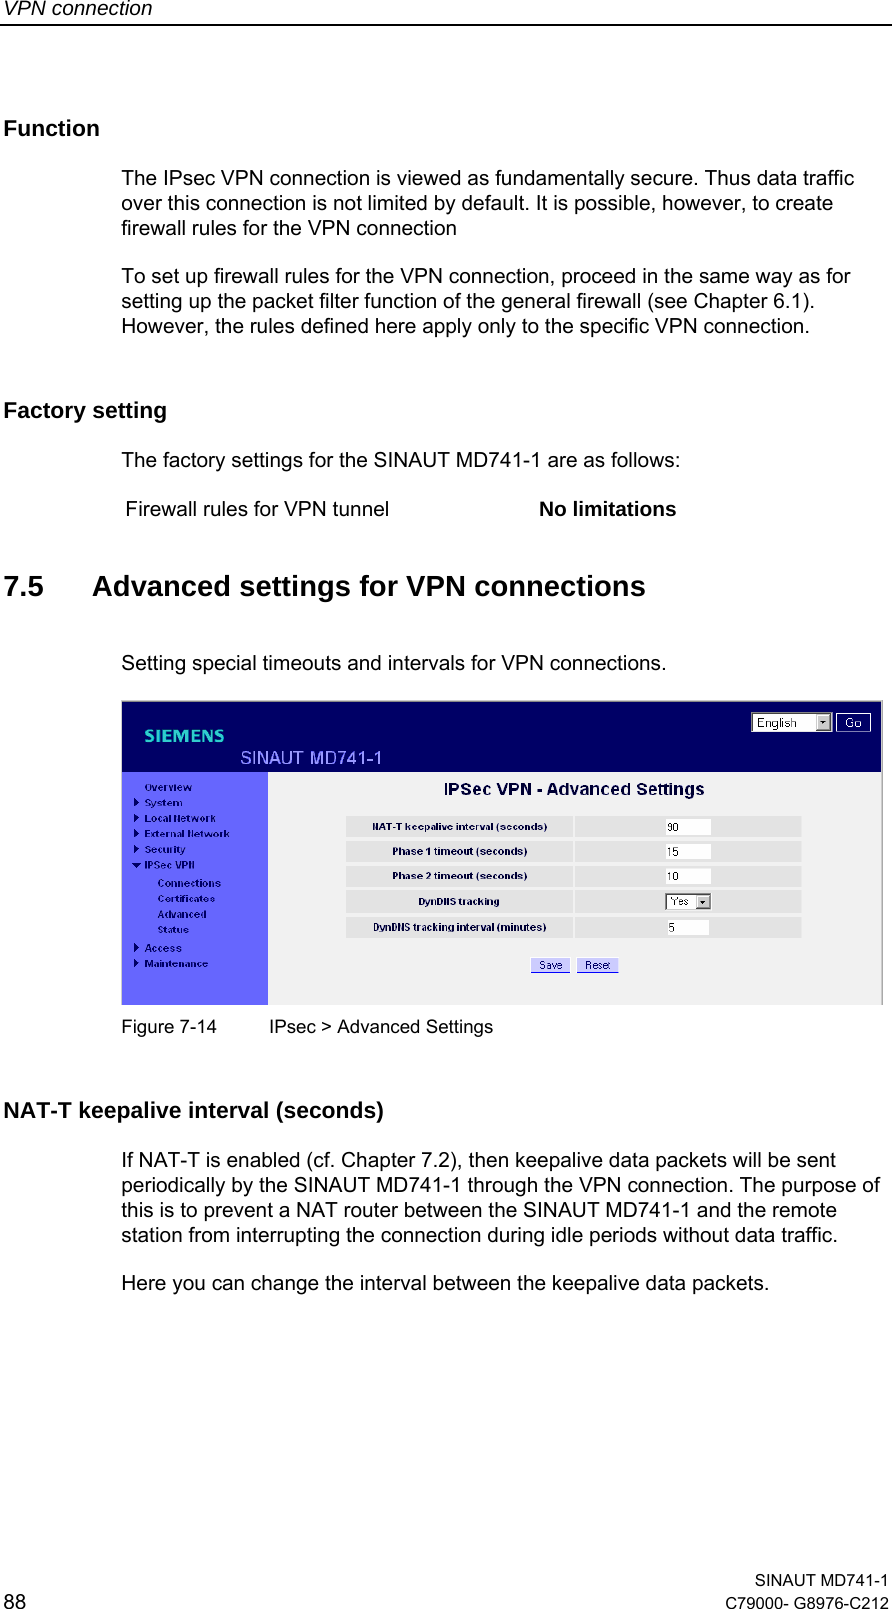 VPN connection  SINAUT MD741-1 88  C79000- G8976-C212   Function  The IPsec VPN connection is viewed as fundamentally secure. Thus data traffic over this connection is not limited by default. It is possible, however, to create firewall rules for the VPN connection To set up firewall rules for the VPN connection, proceed in the same way as for setting up the packet filter function of the general firewall (see Chapter 6.1). However, the rules defined here apply only to the specific VPN connection. Factory setting  The factory settings for the SINAUT MD741-1 are as follows:  Firewall rules for VPN tunnel  No limitations  7.5  Advanced settings for VPN connections Setting special timeouts and intervals for VPN connections.    Figure 7-14  IPsec &gt; Advanced Settings NAT-T keepalive interval (seconds) If NAT-T is enabled (cf. Chapter 7.2), then keepalive data packets will be sent periodically by the SINAUT MD741-1 through the VPN connection. The purpose of this is to prevent a NAT router between the SINAUT MD741-1 and the remote station from interrupting the connection during idle periods without data traffic. Here you can change the interval between the keepalive data packets. 